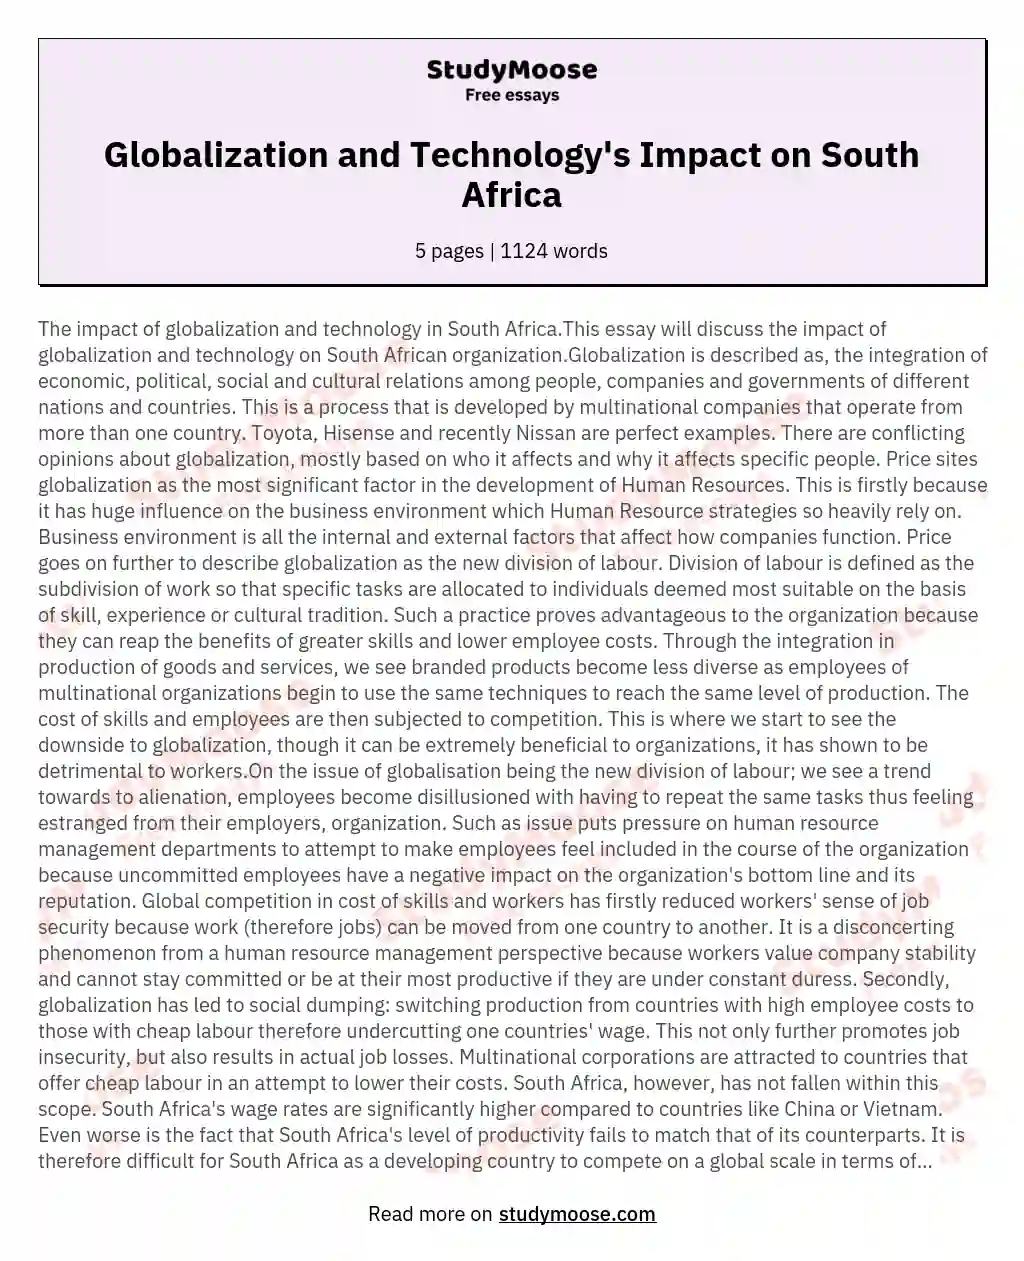 Globalization and Technology's Impact on South Africa essay